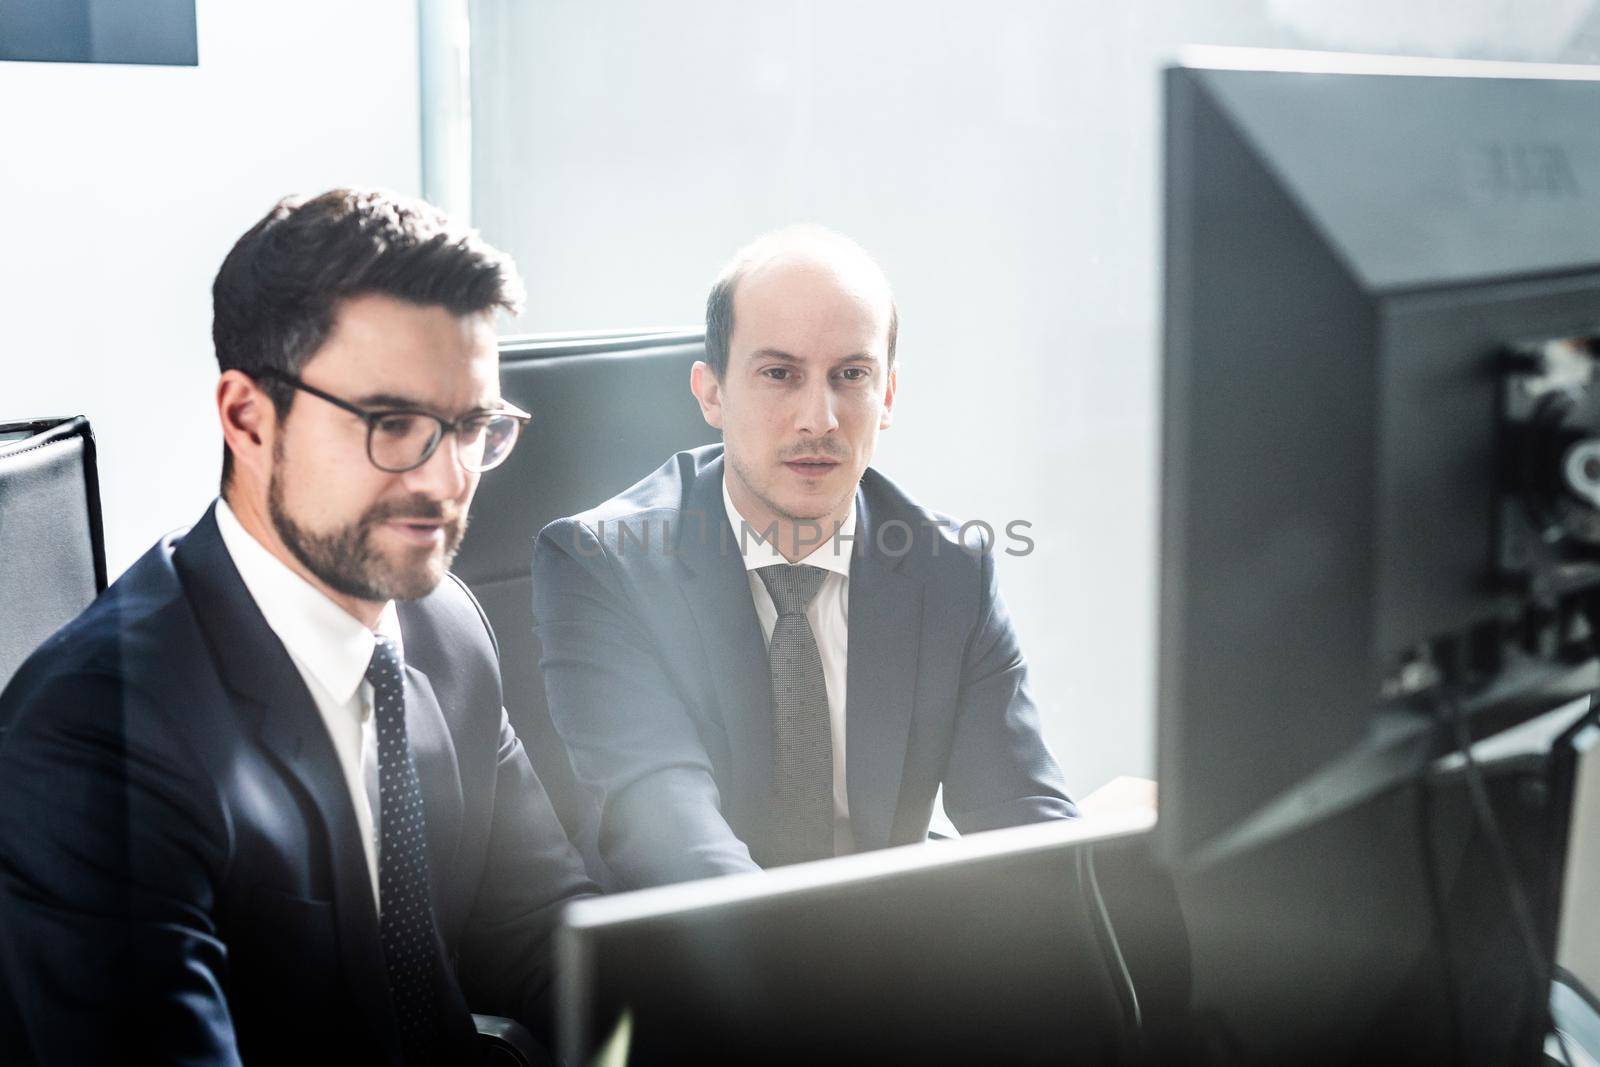 Image of two thoughtful businessmen looking at data on multiple computer screens, solving business issue at business meeting in modern corporate office. Business success concept.